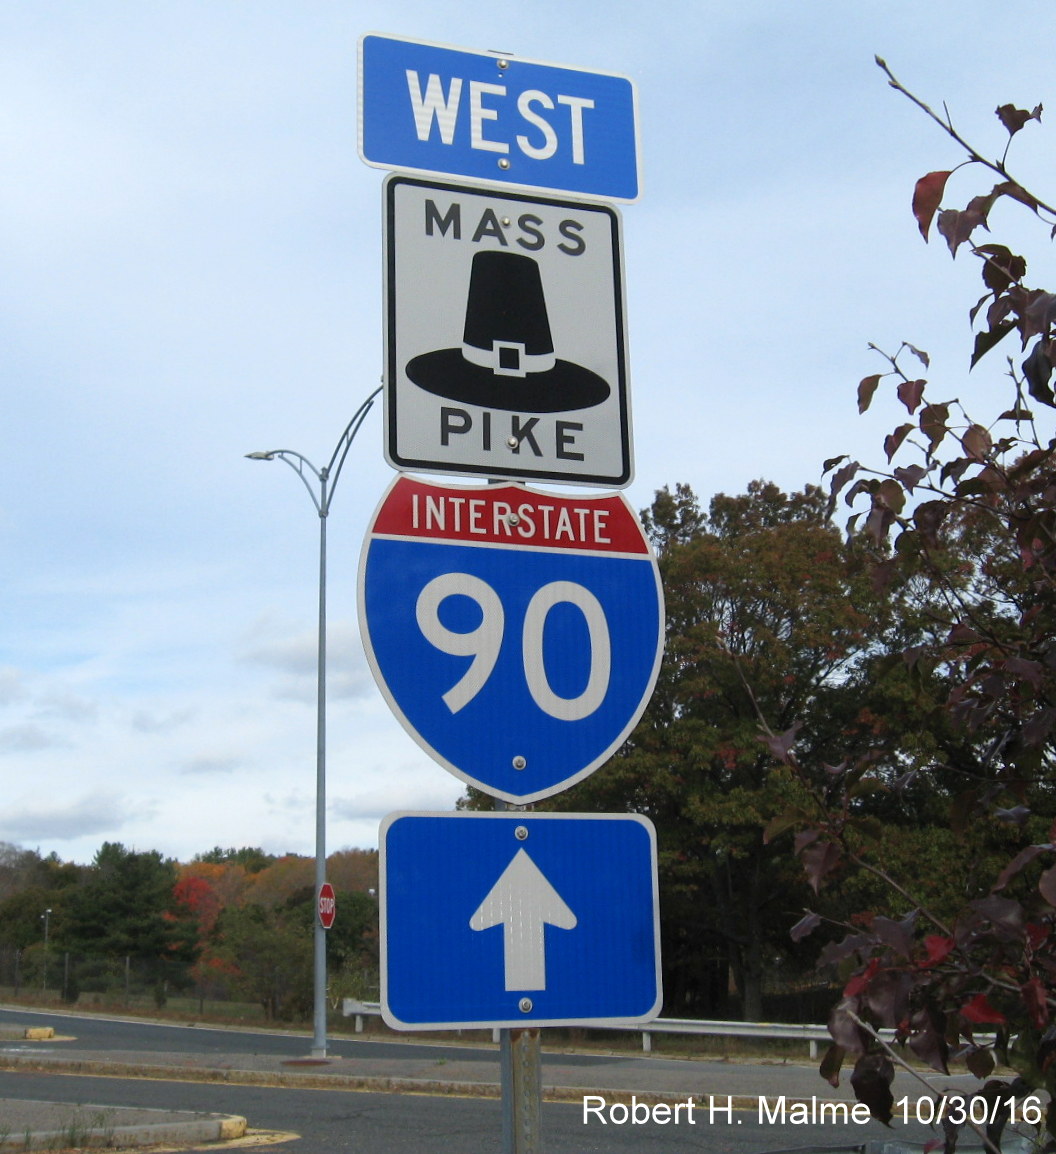 Image of Mass Pike/I-90 Trailblazer on ramp between Pike and MA 30 in Weston